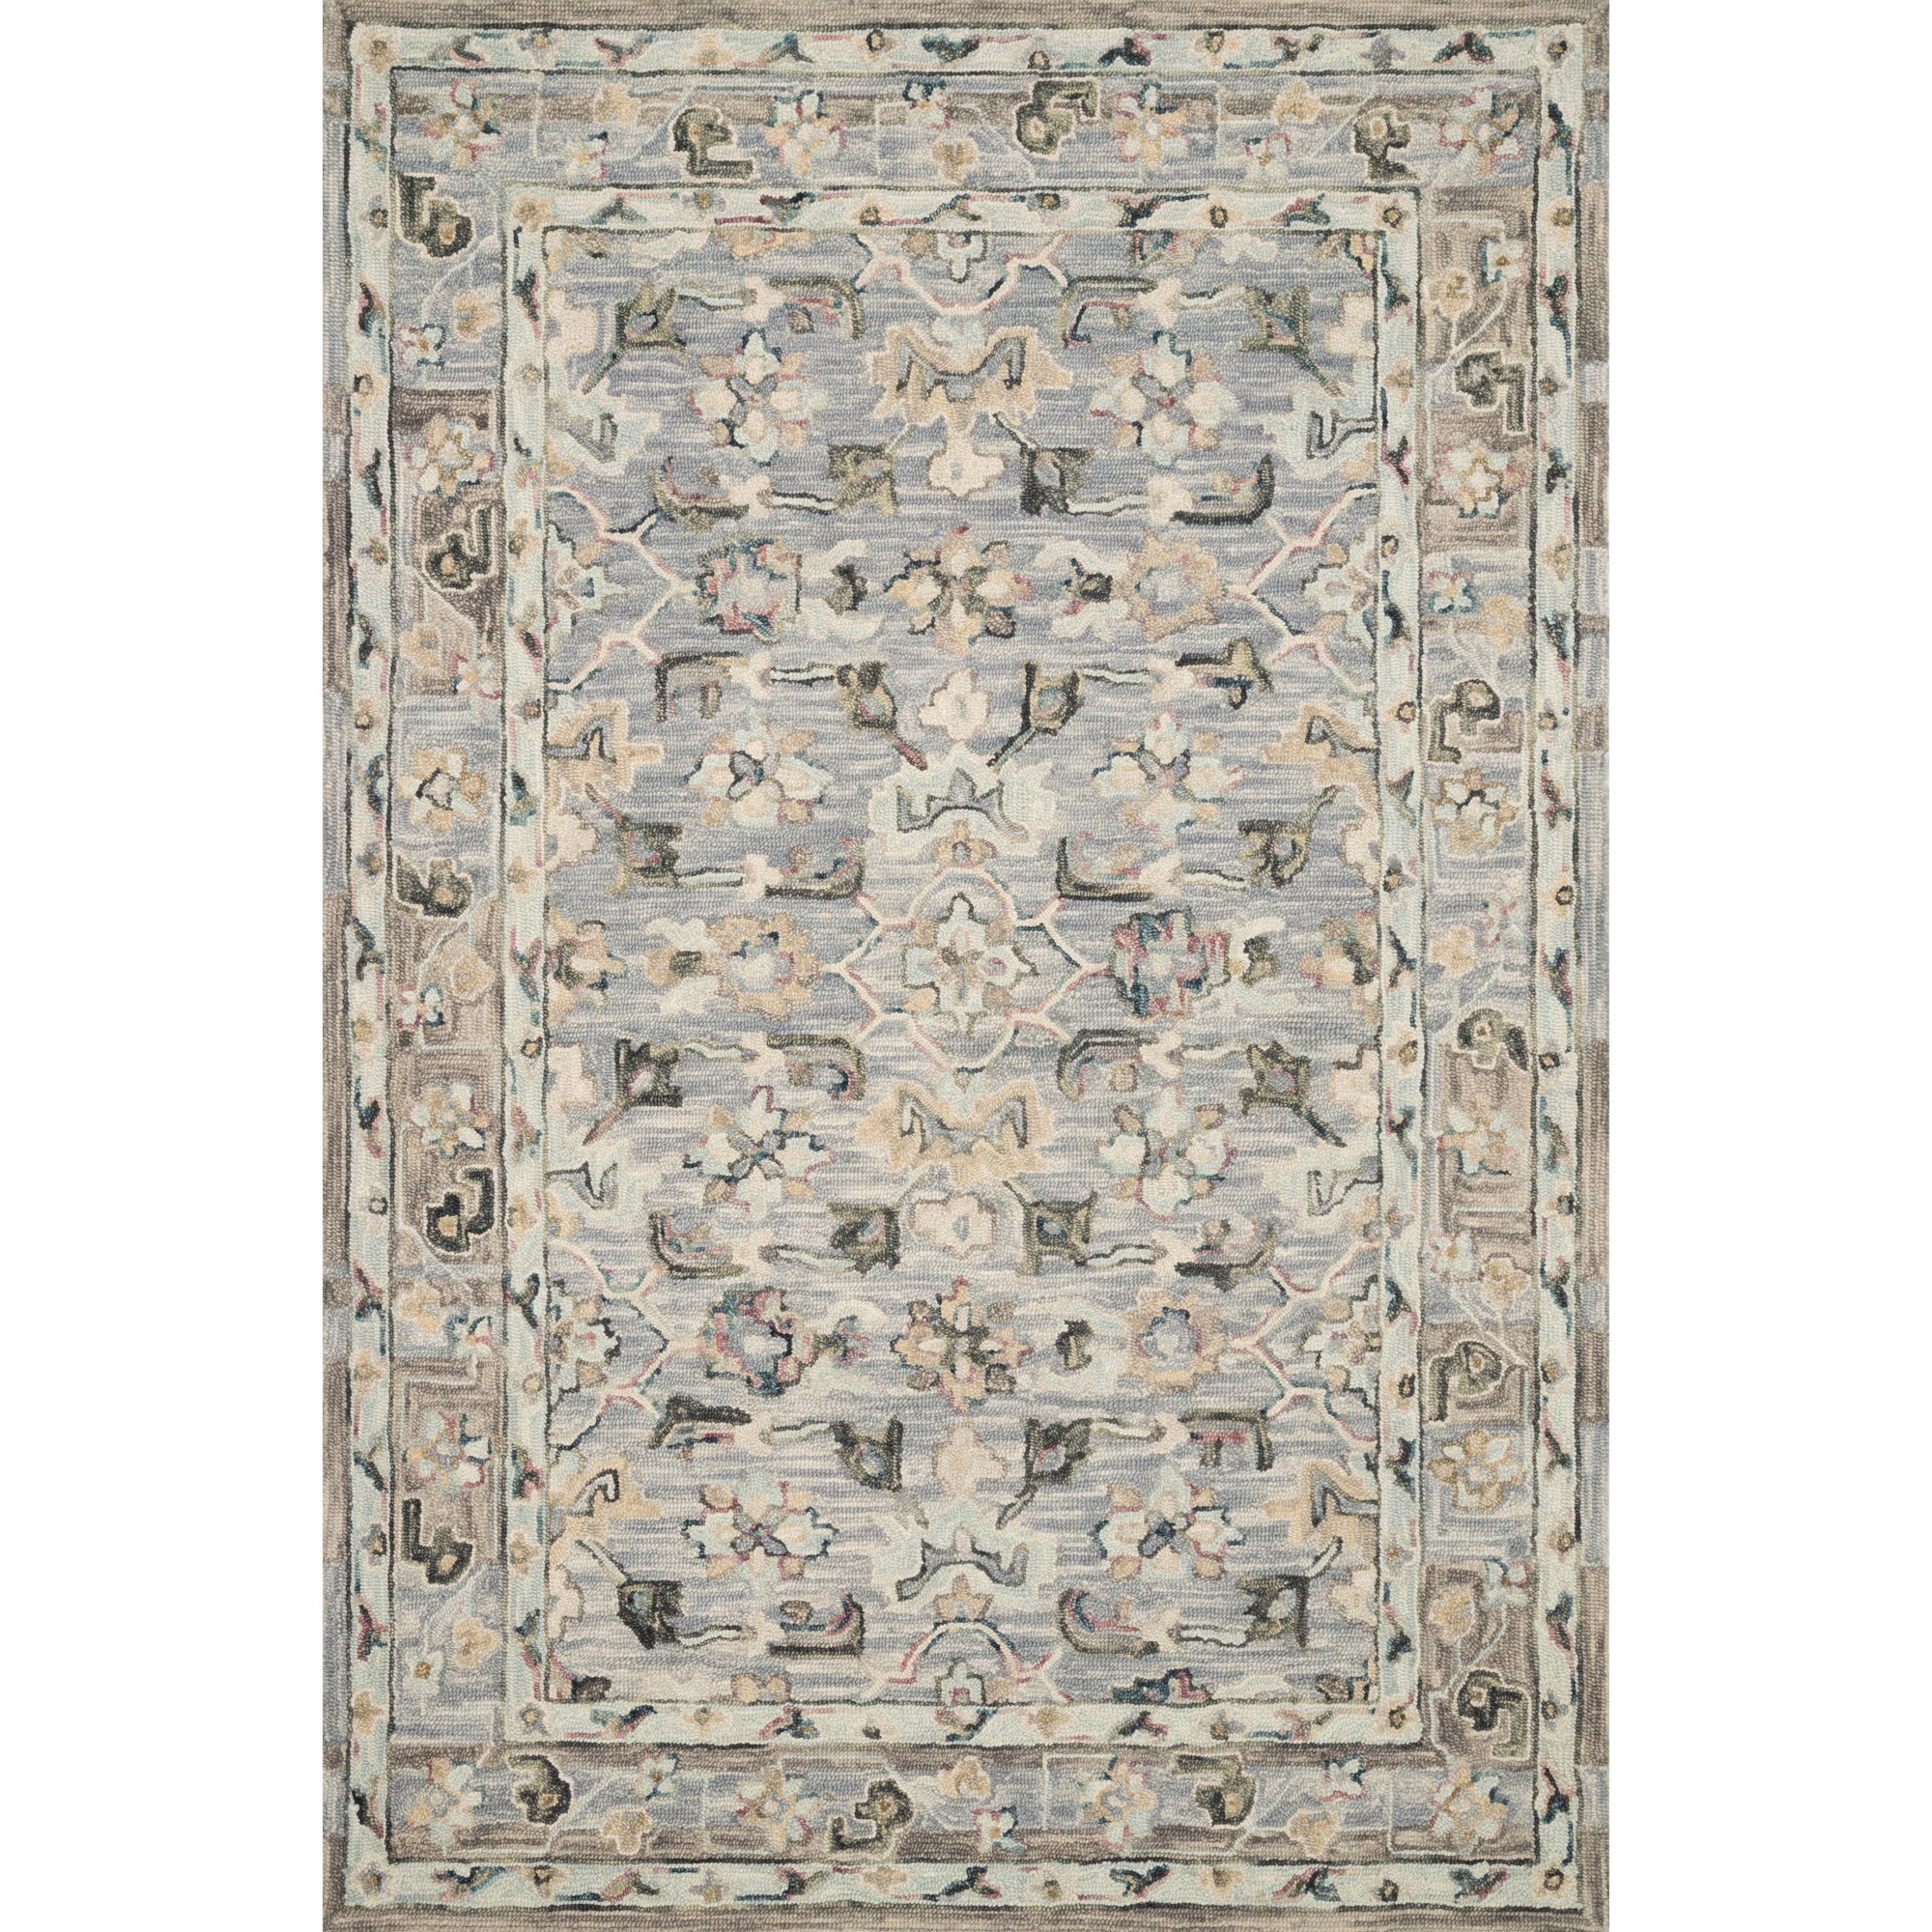 Rugs by Roo Loloi Beatty Light Blue Multi Area Rug in size 18" x 18" Sample